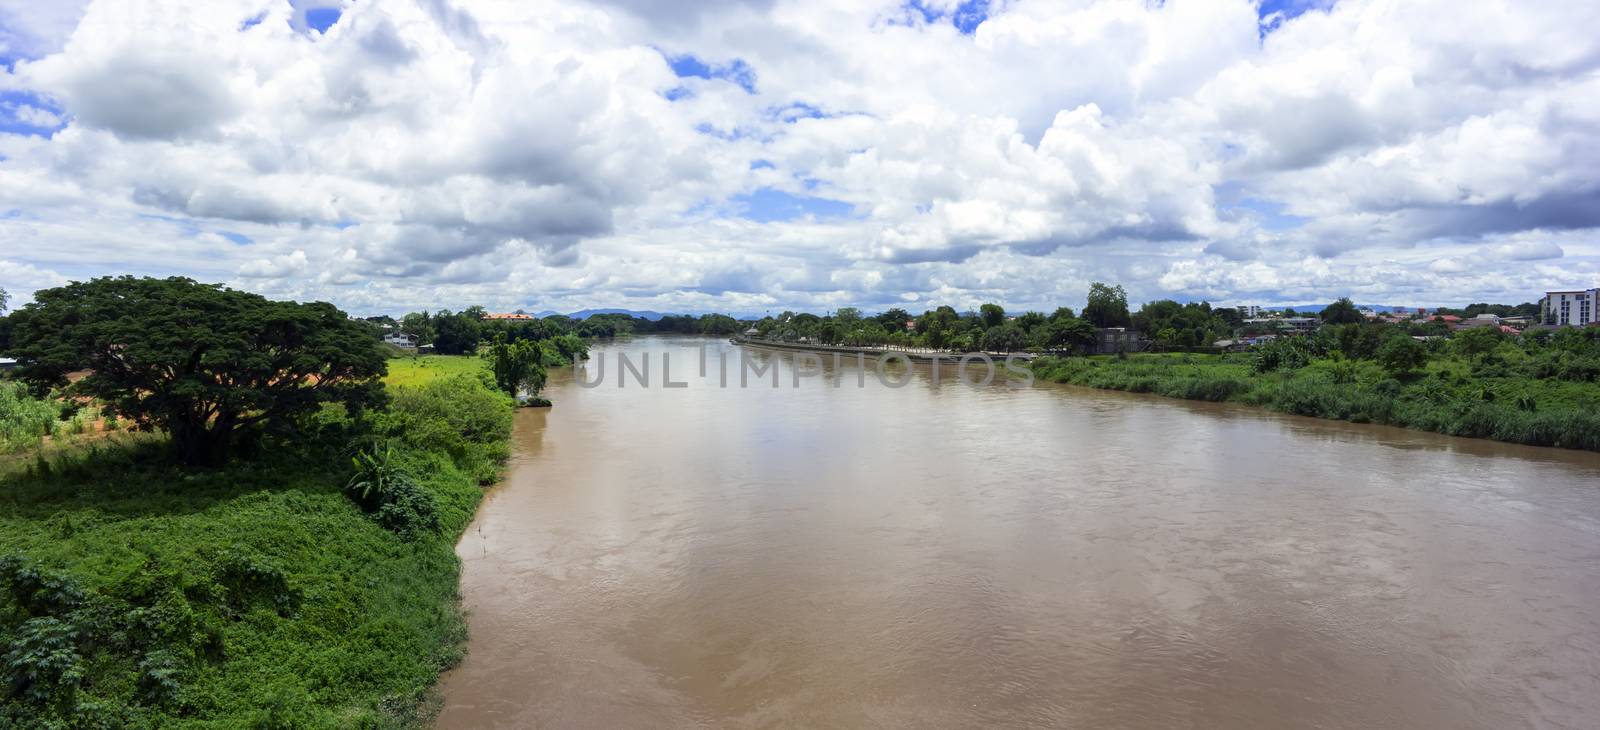 Mekok River Panorama. Flowing from Thaton to Chiang Mai, Thailand.